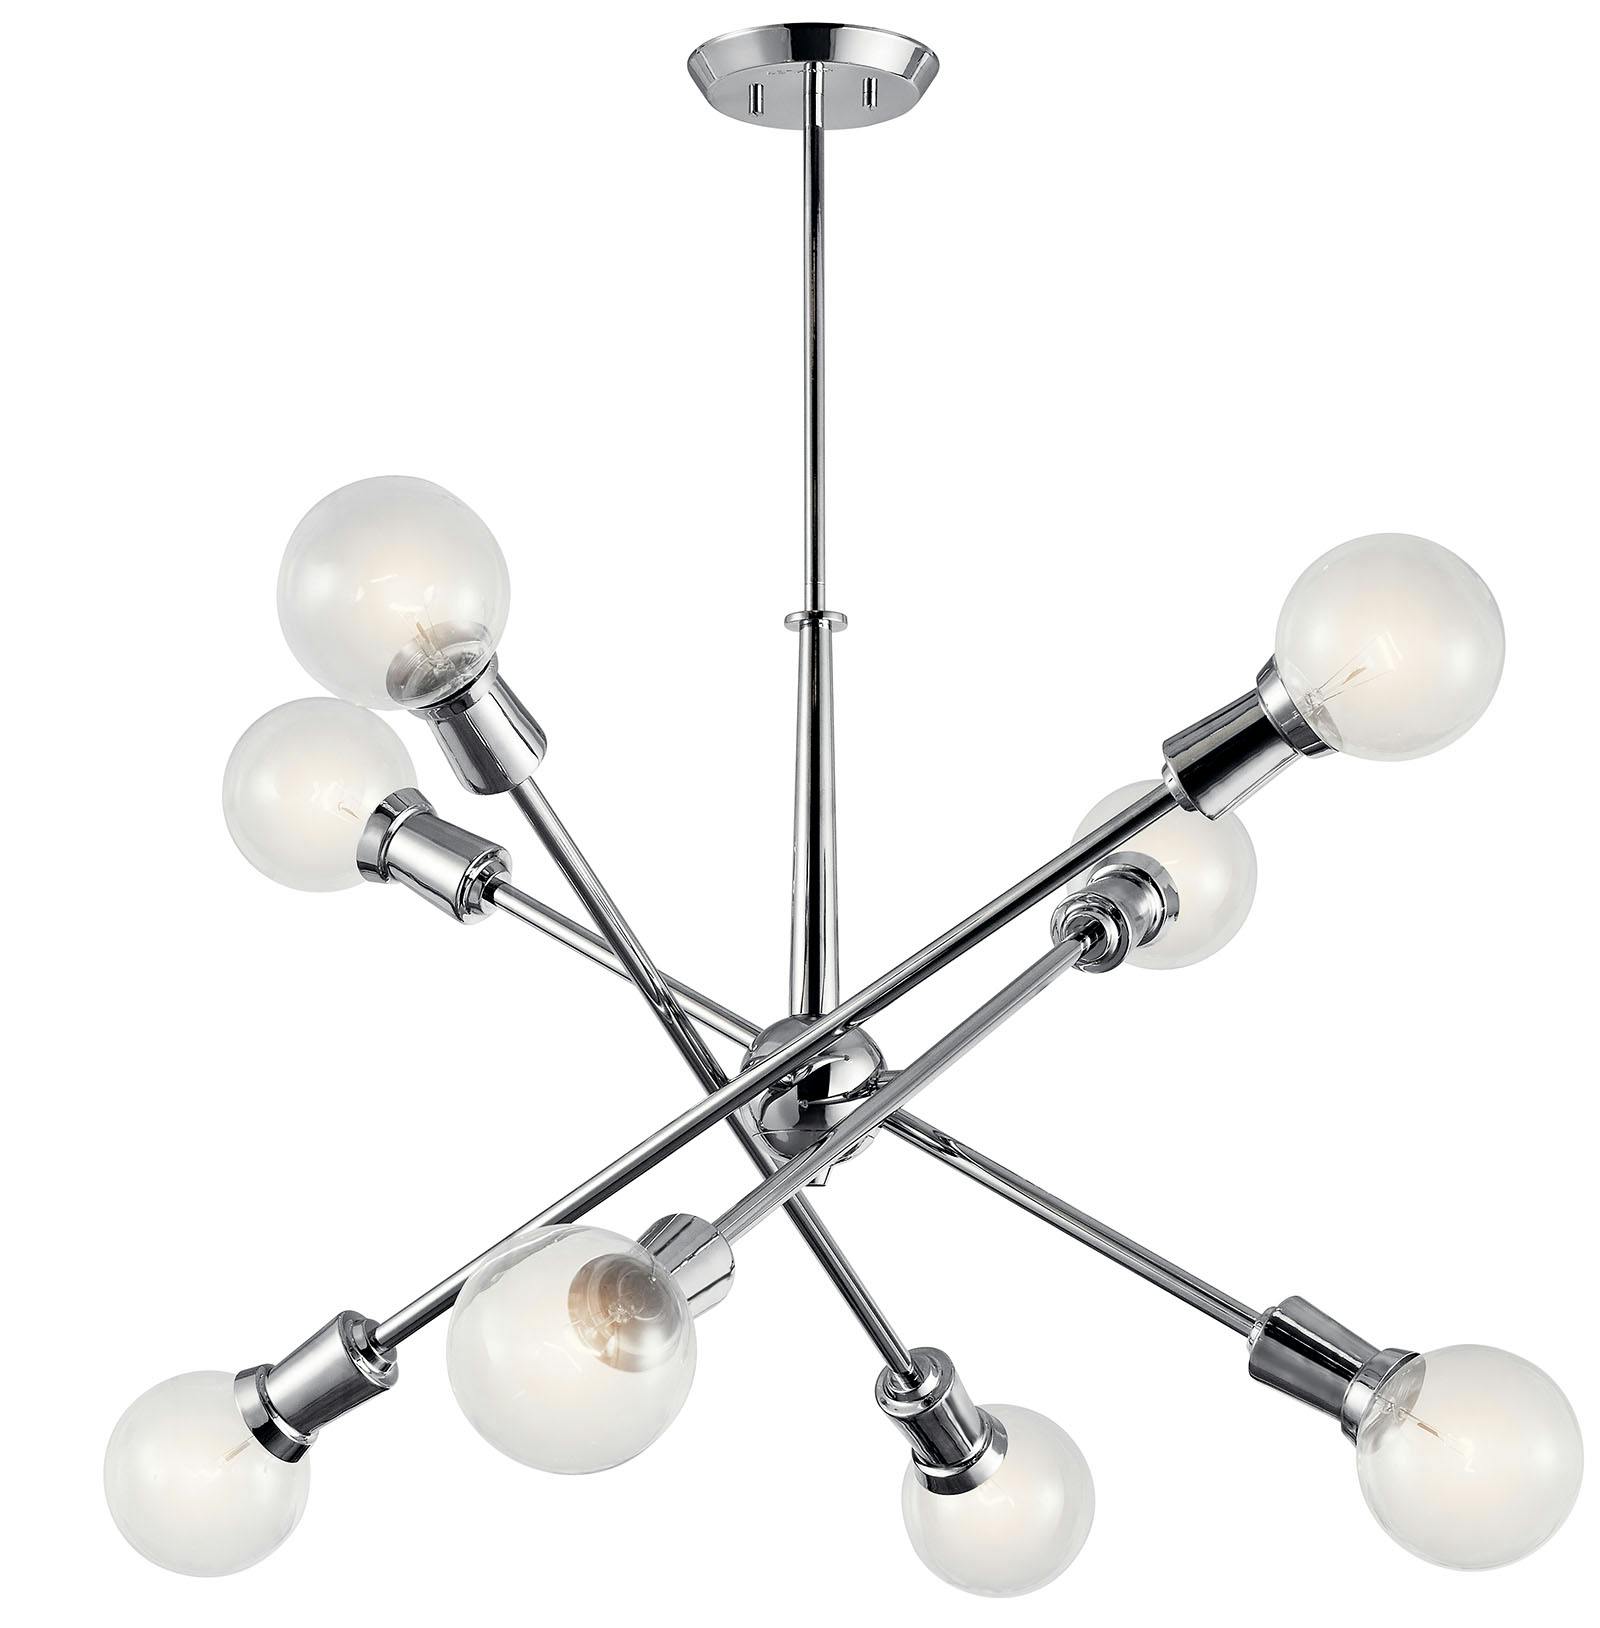 Armstrong 26" 8 light Chandelier Chrome on a white background